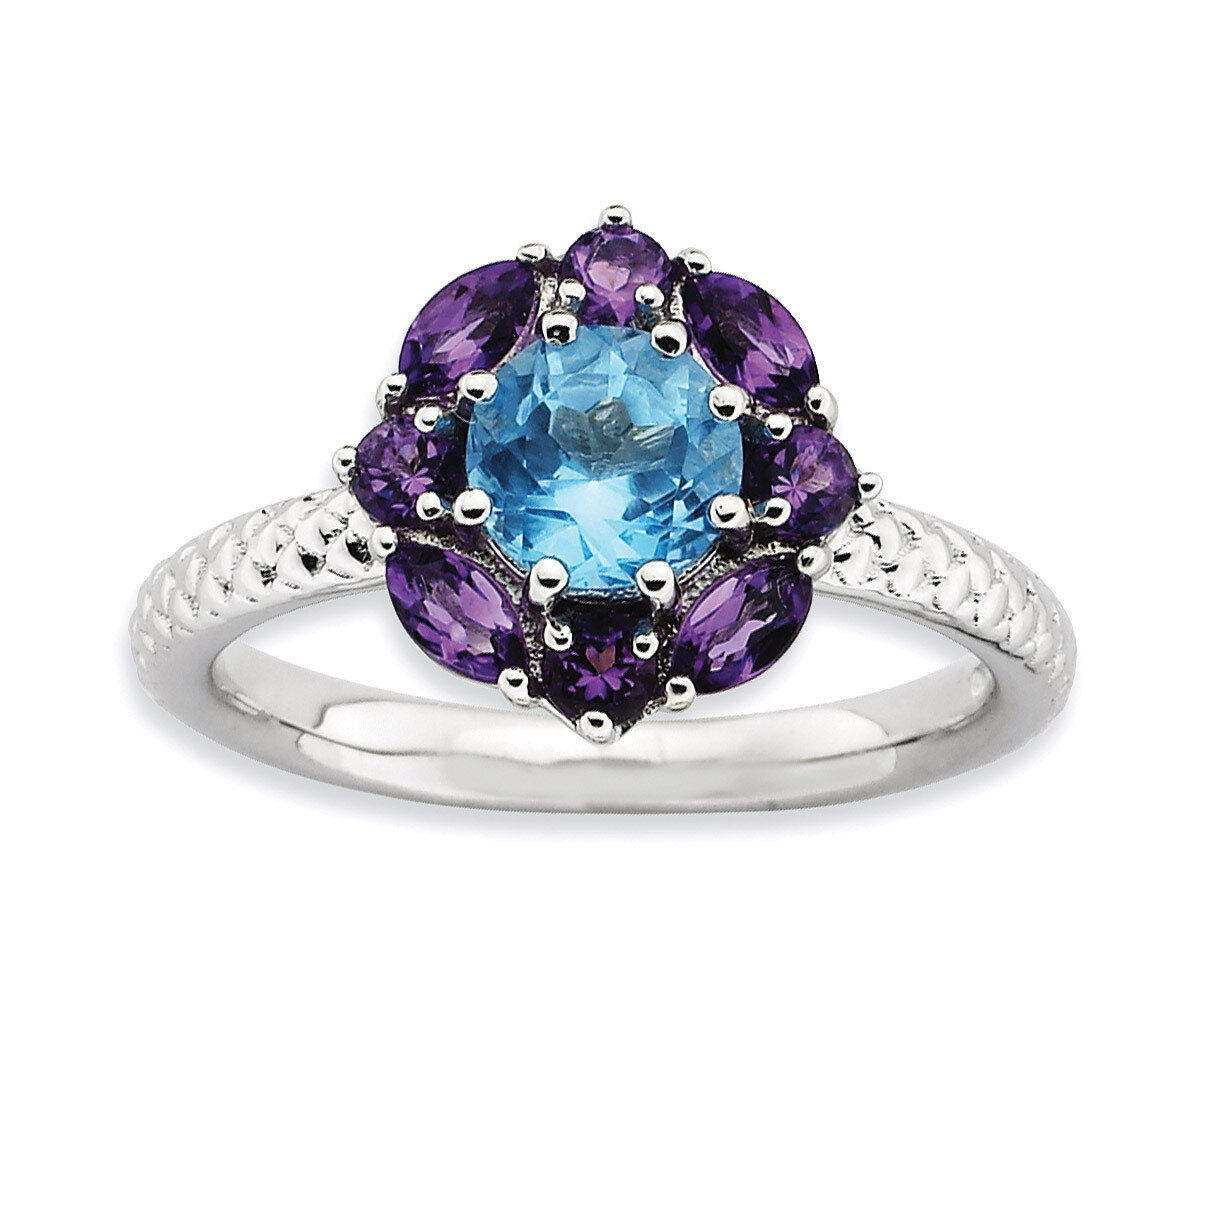 Amethyst and Blue Topaz Ring - Sterling Silver QSK792